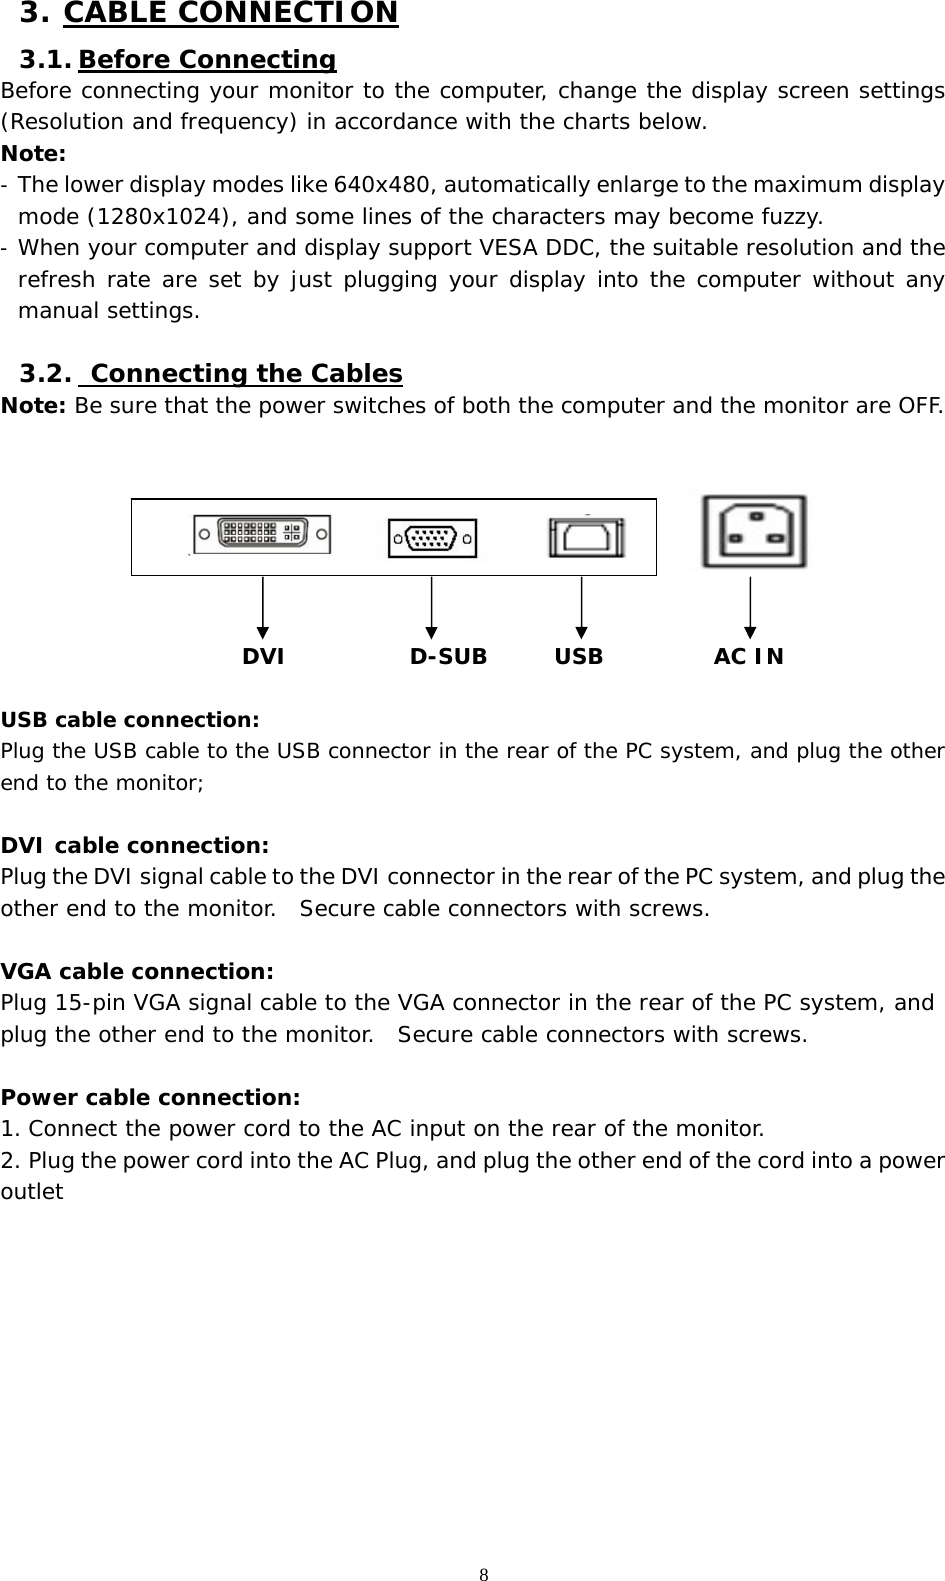   8 3. CABLE CONNECTION 3.1. Before Connecting Before connecting your monitor to the computer, change the display screen settings (Resolution and frequency) in accordance with the charts below.  Note: -  The lower display modes like 640x480, automatically enlarge to the maximum display mode (1280x1024), and some lines of the characters may become fuzzy.  -  When your computer and display support VESA DDC, the suitable resolution and the refresh rate are set by just plugging your display into the computer without any manual settings.   3.2.  Connecting the Cables Note: Be sure that the power switches of both the computer and the monitor are OFF.                                   DVI           D-SUB      USB          AC IN  USB cable connection: Plug the USB cable to the USB connector in the rear of the PC system, and plug the other end to the monitor;  DVI cable connection: Plug the DVI signal cable to the DVI connector in the rear of the PC system, and plug the other end to the monitor.  Secure cable connectors with screws.  VGA cable connection: Plug 15-pin VGA signal cable to the VGA connector in the rear of the PC system, and plug the other end to the monitor.  Secure cable connectors with screws.  Power cable connection: 1. Connect the power cord to the AC input on the rear of the monitor. 2. Plug the power cord into the AC Plug, and plug the other end of the cord into a power outlet           